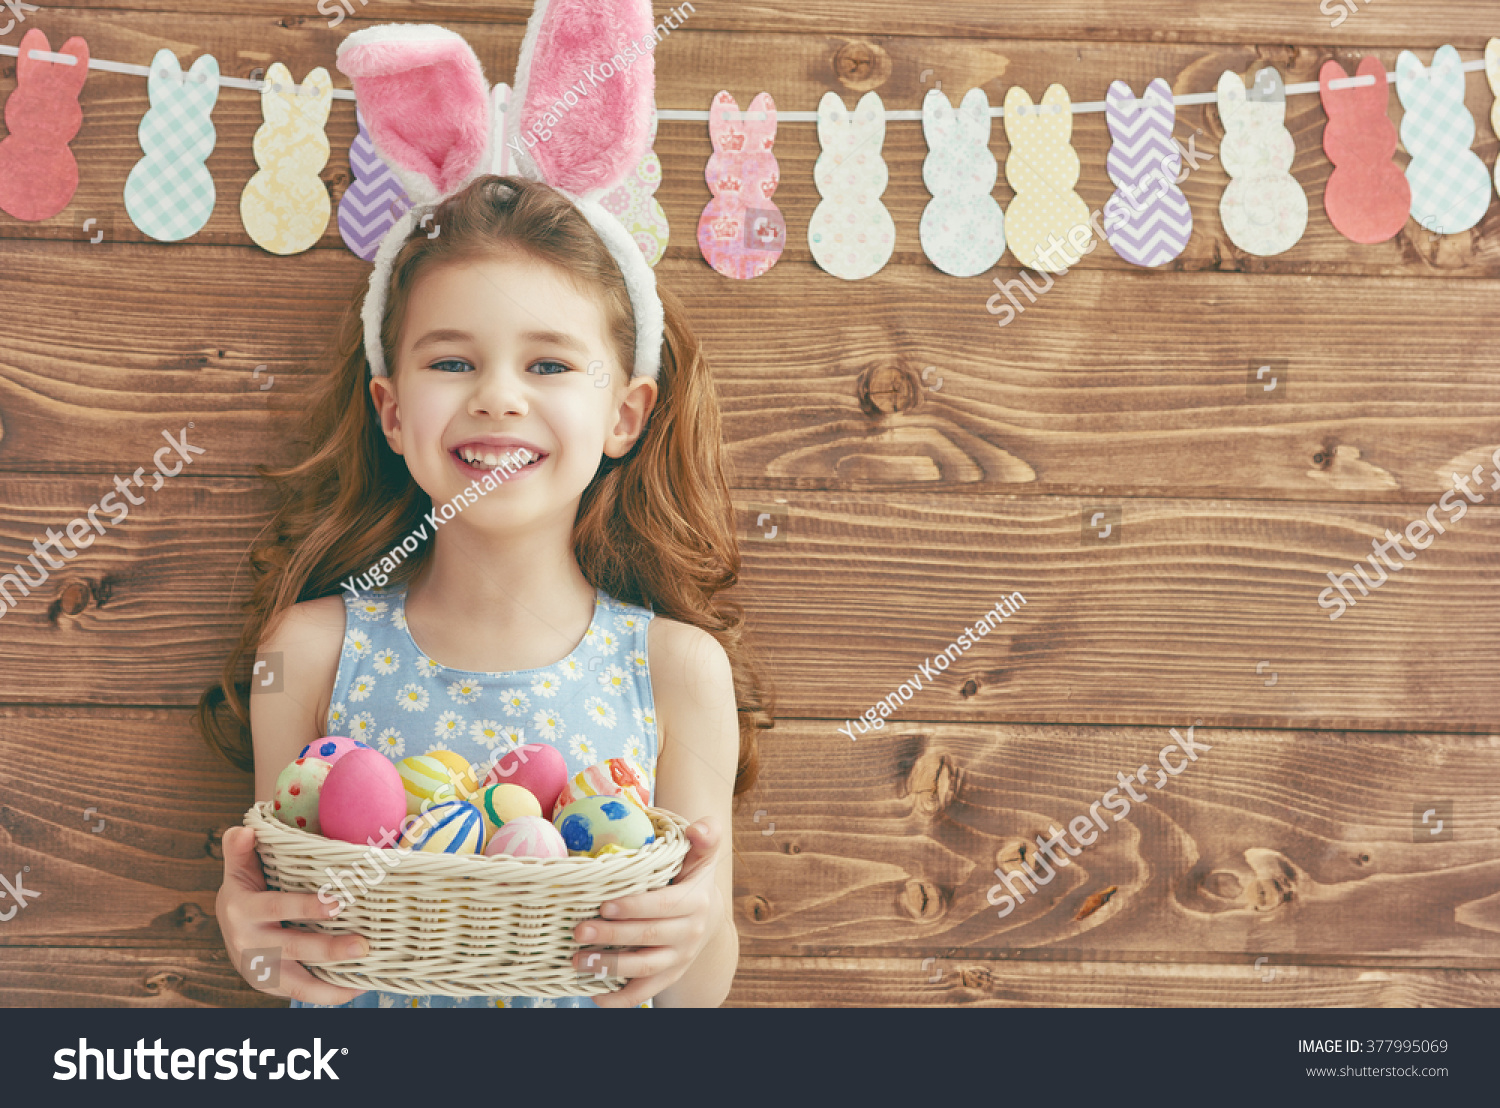 Cute little child girl wearing bunny ears on Easter day. Girl holding basket with painted eggs. #377995069